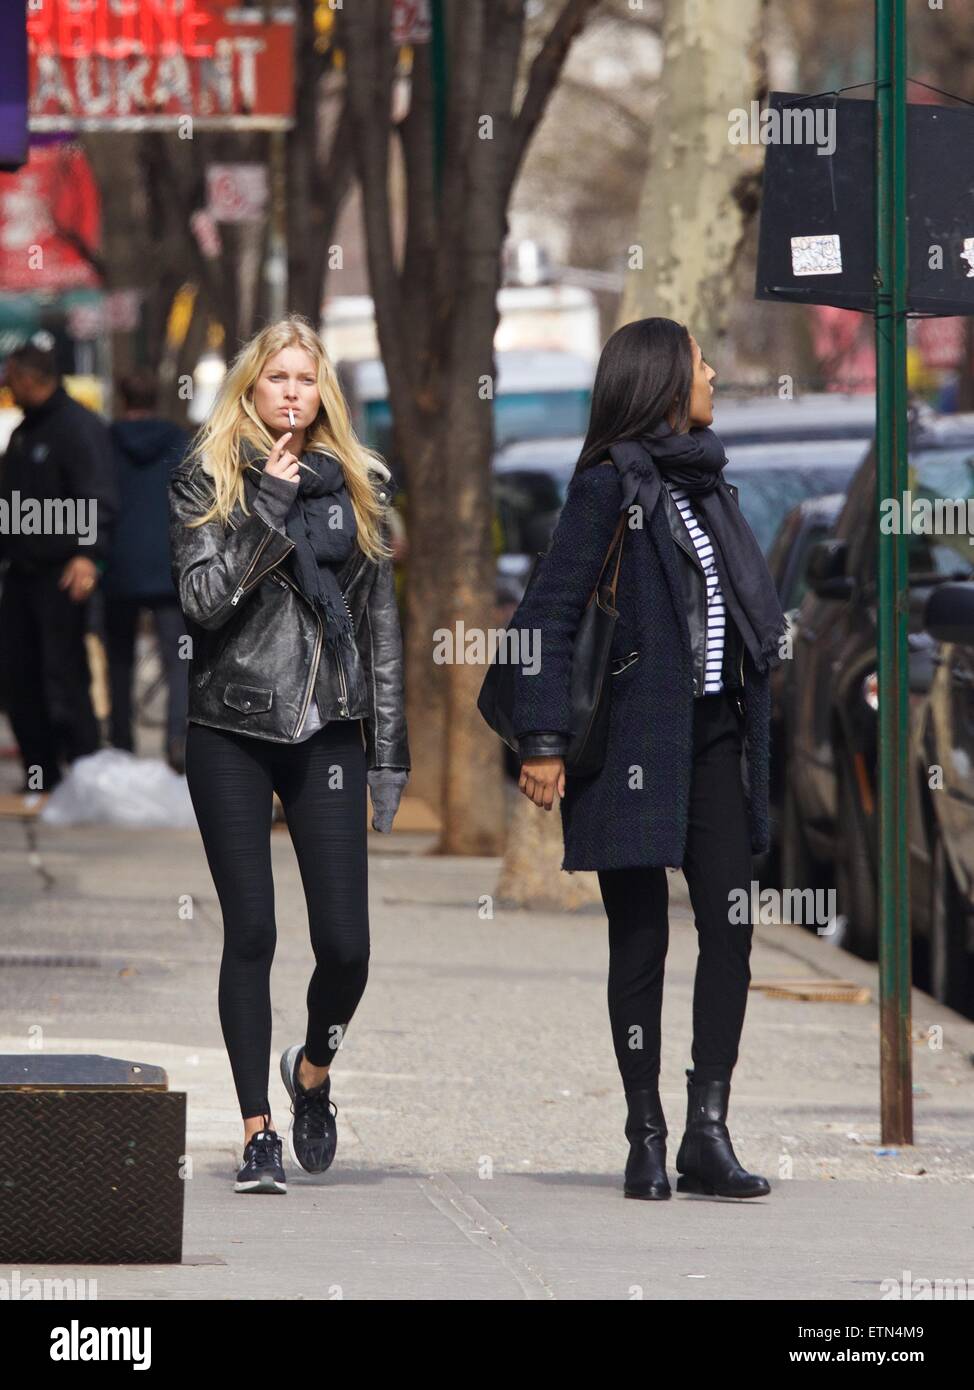 Model Elsa Hosk out and about in New York City Featuring: Elsa Hosk Where:  New York City, New York, United States When: 16 Mar 2015 Credit: Alberto  Reyes/WENN.com Stock Photo - Alamy